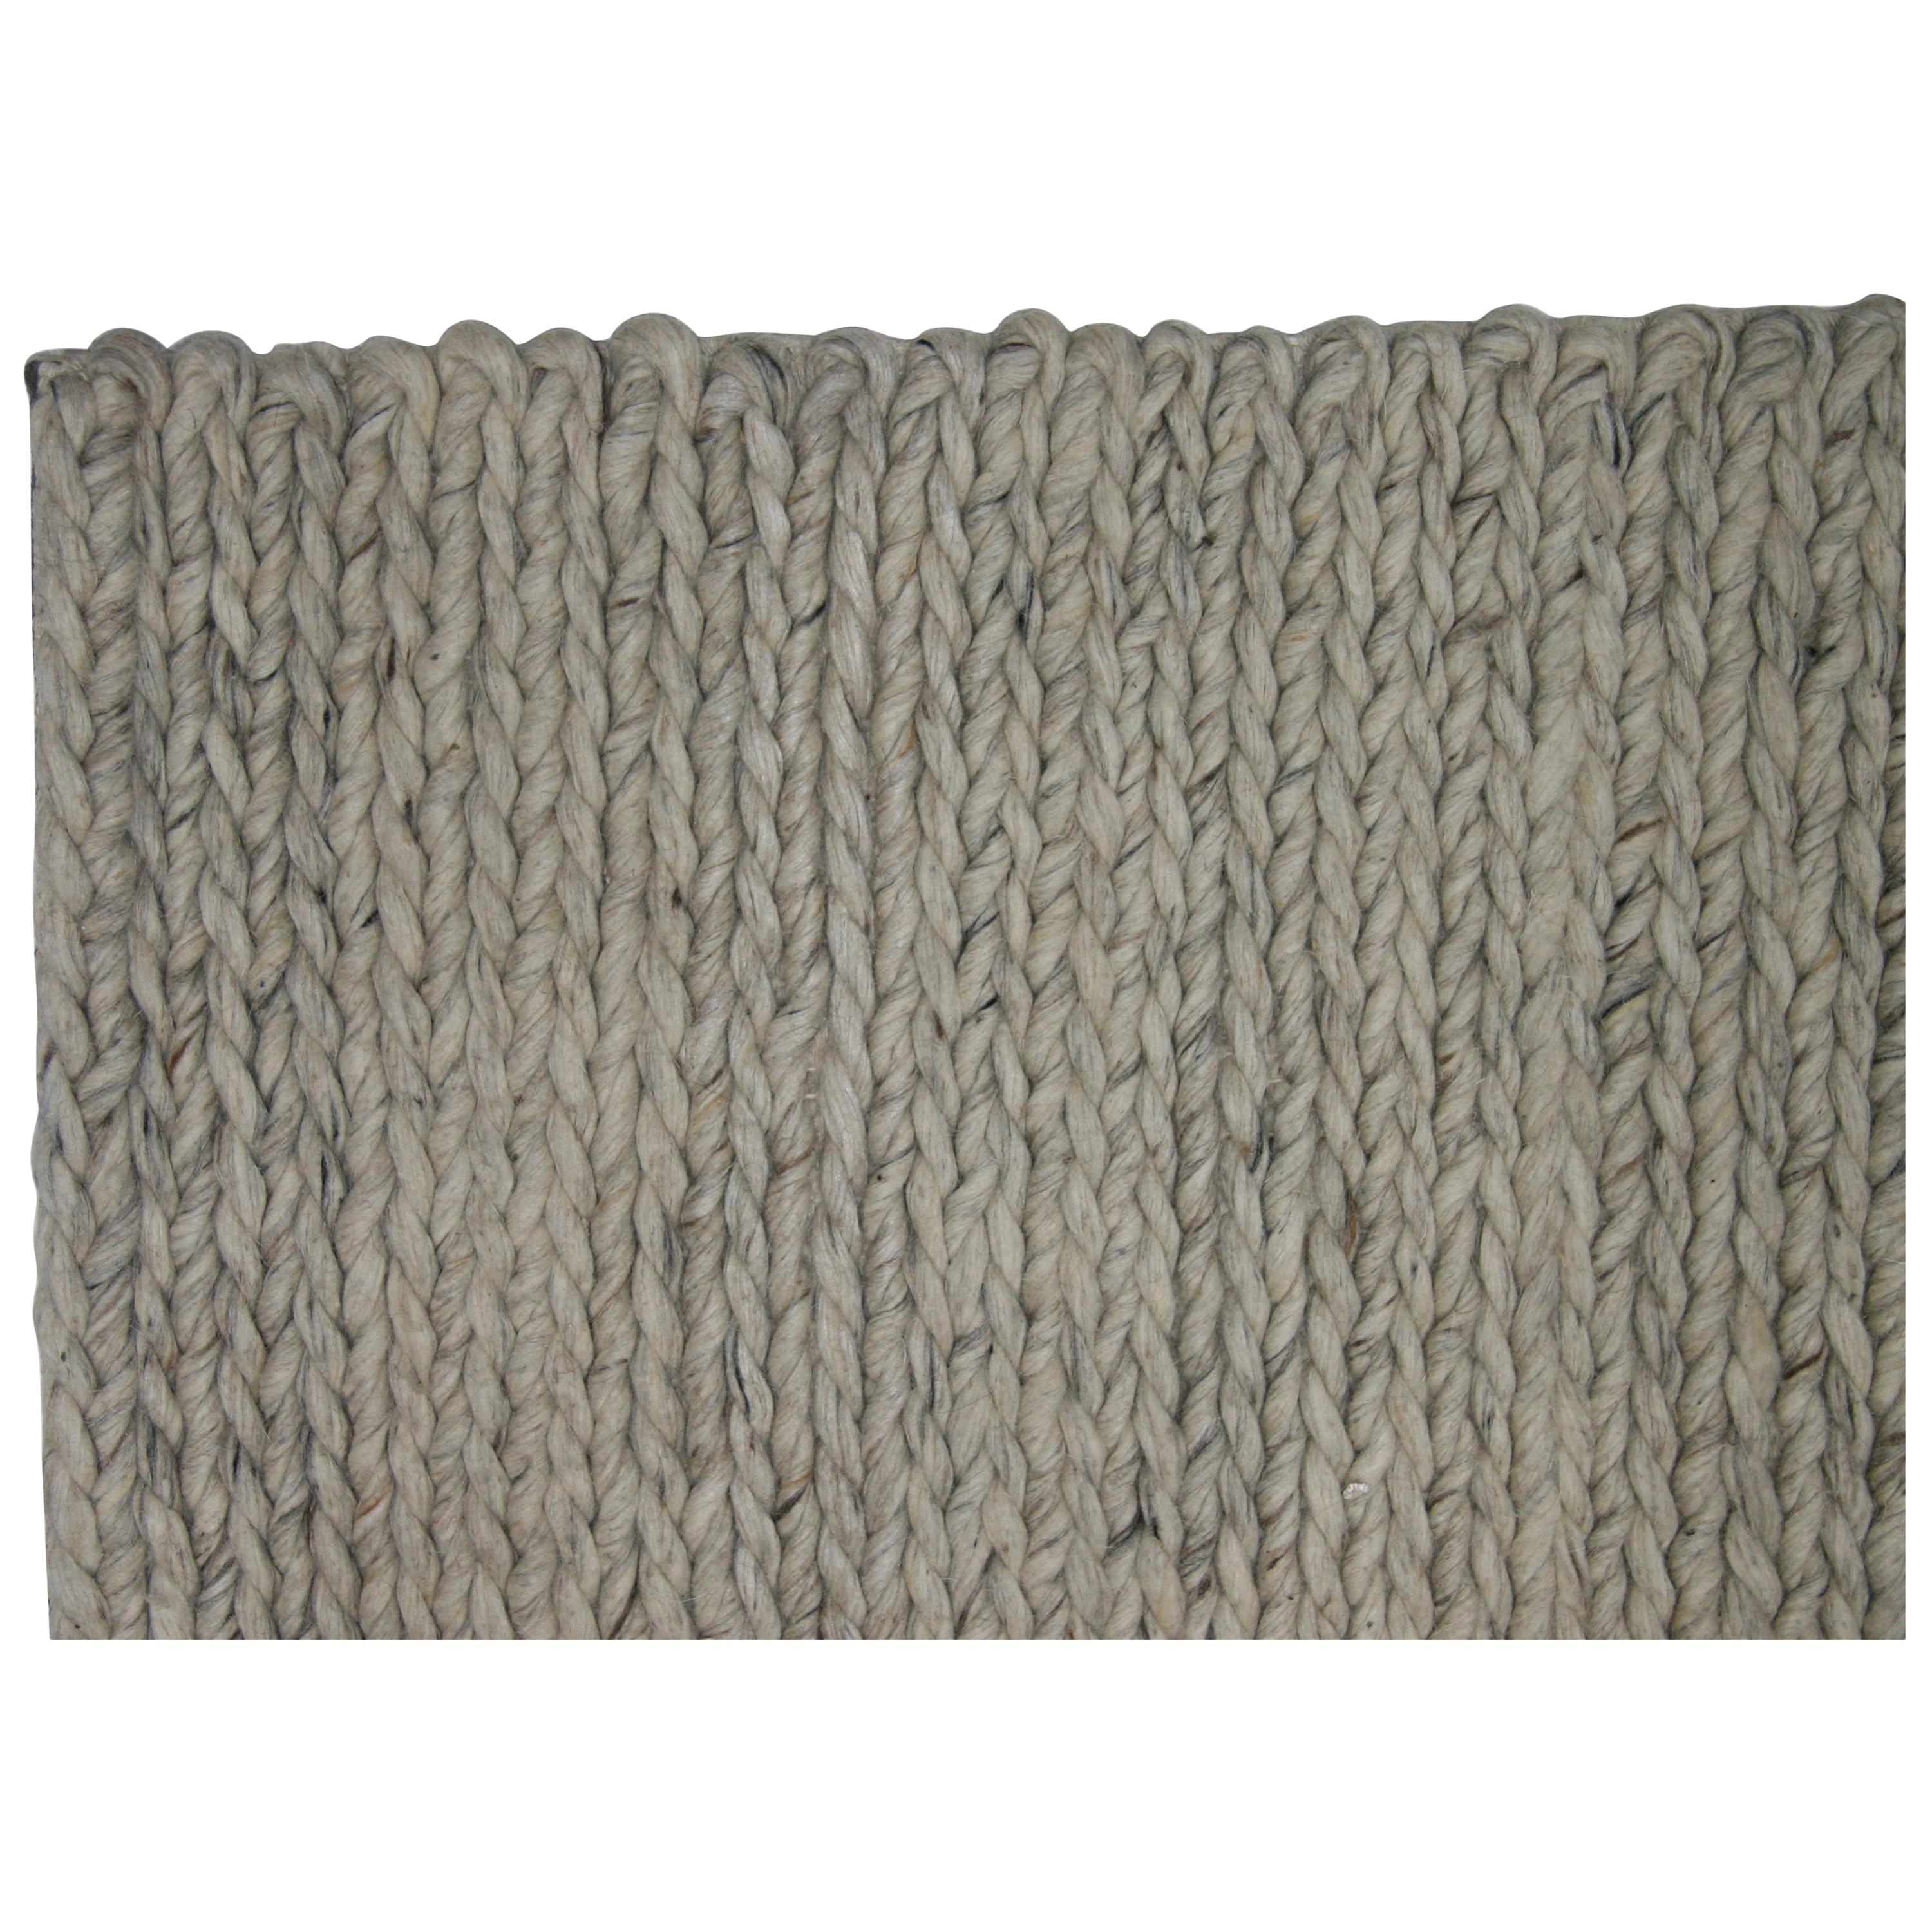 Oatmeal Braided Wool Area Rug For Sale